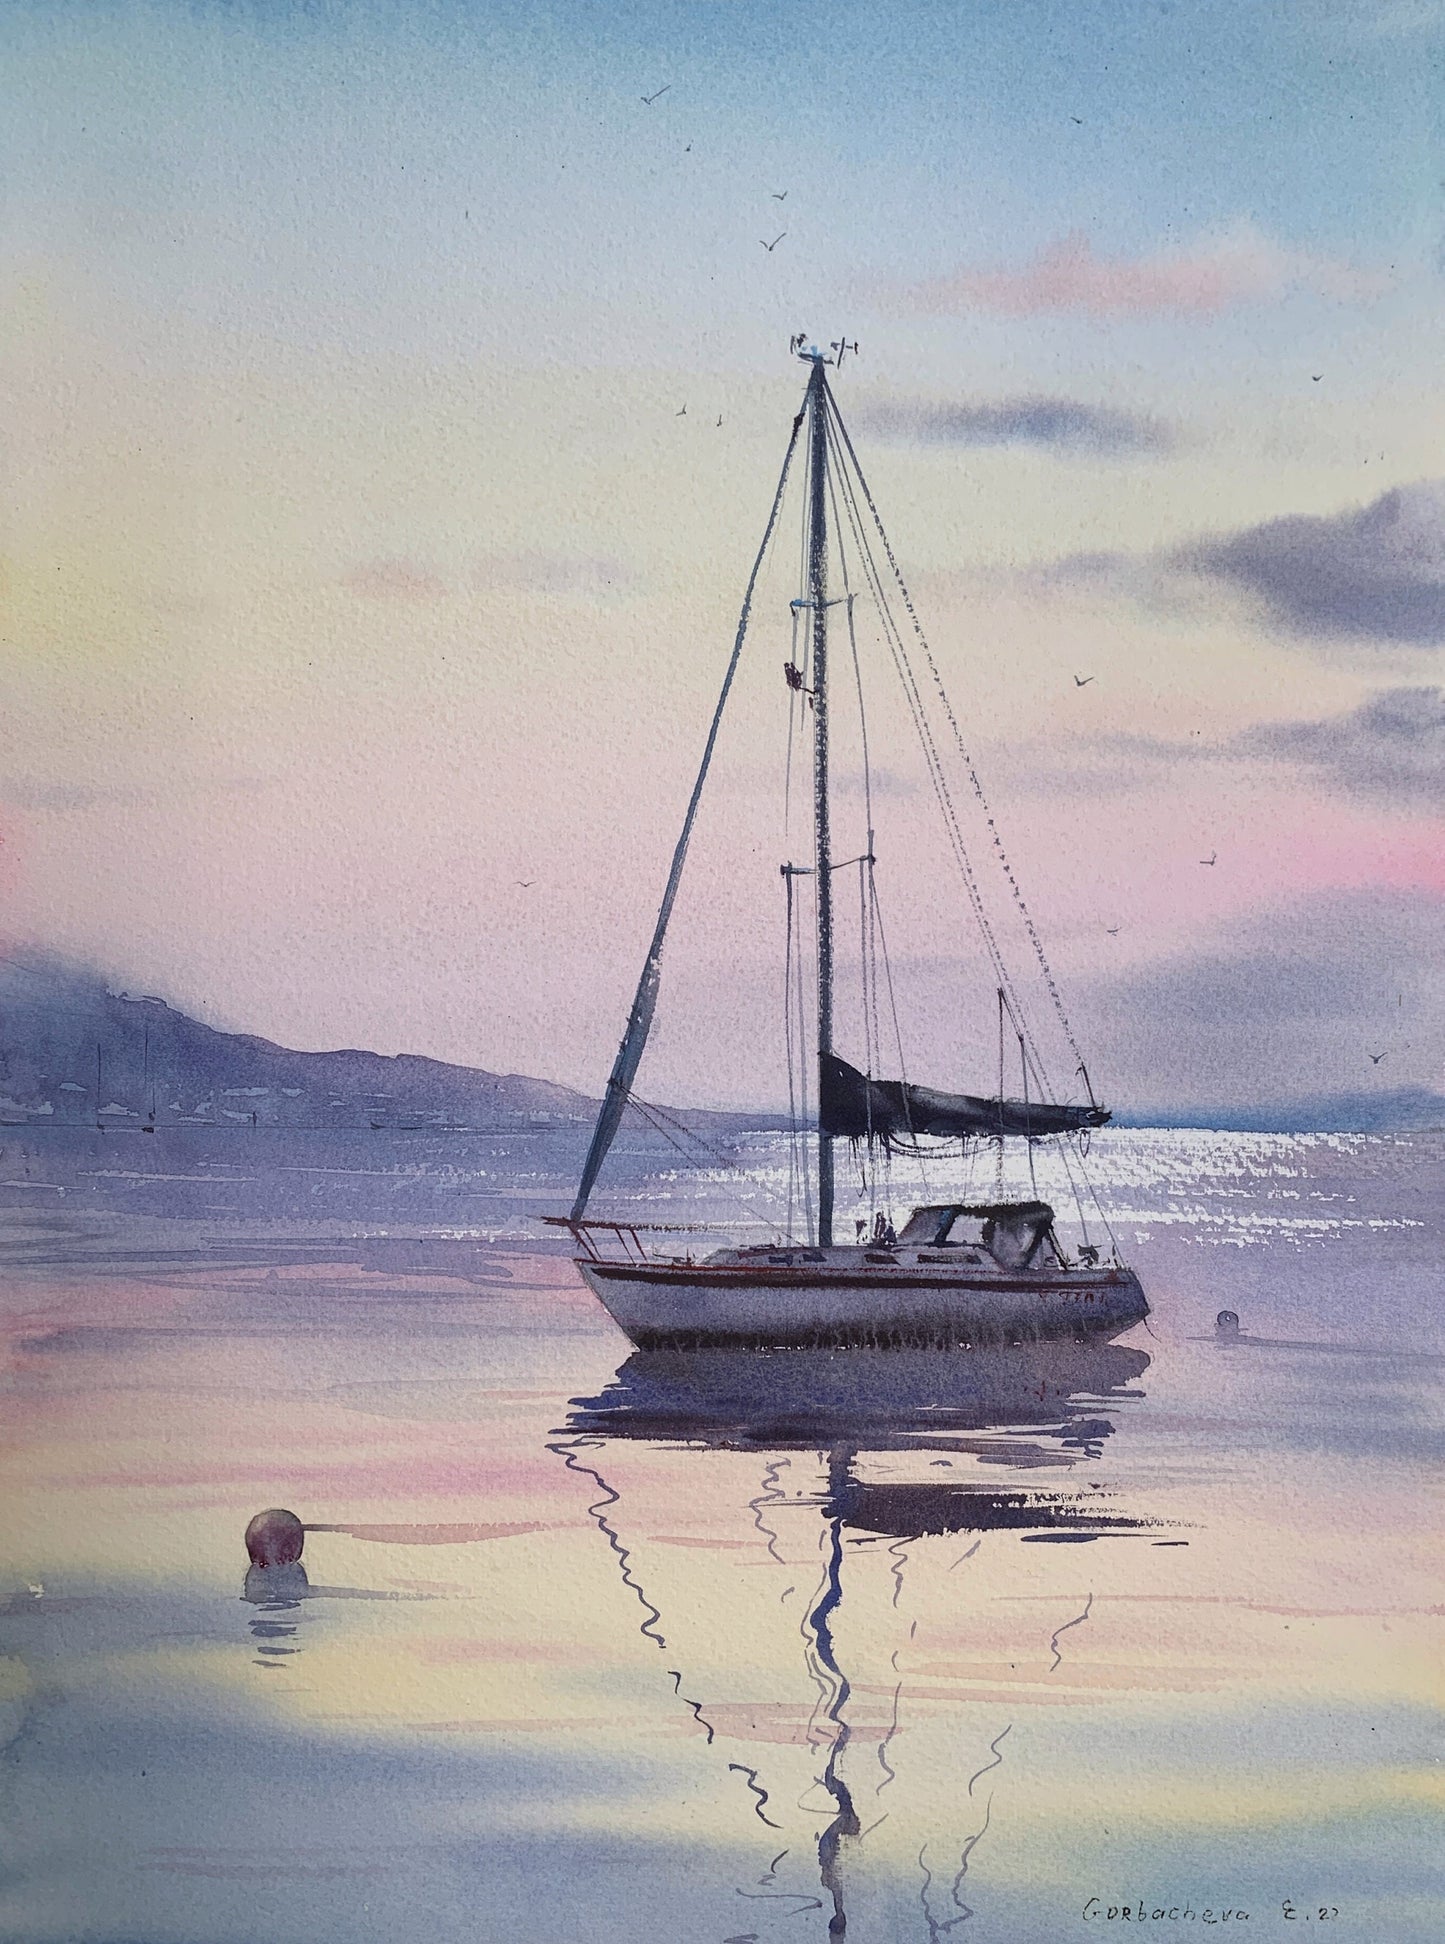 Painting Original, Sail Boat Watercolor, Seascape Art, Coastal Sunset, Yachting Living Room Wall Decor, Gift For Her, Blue, Orange, Pink